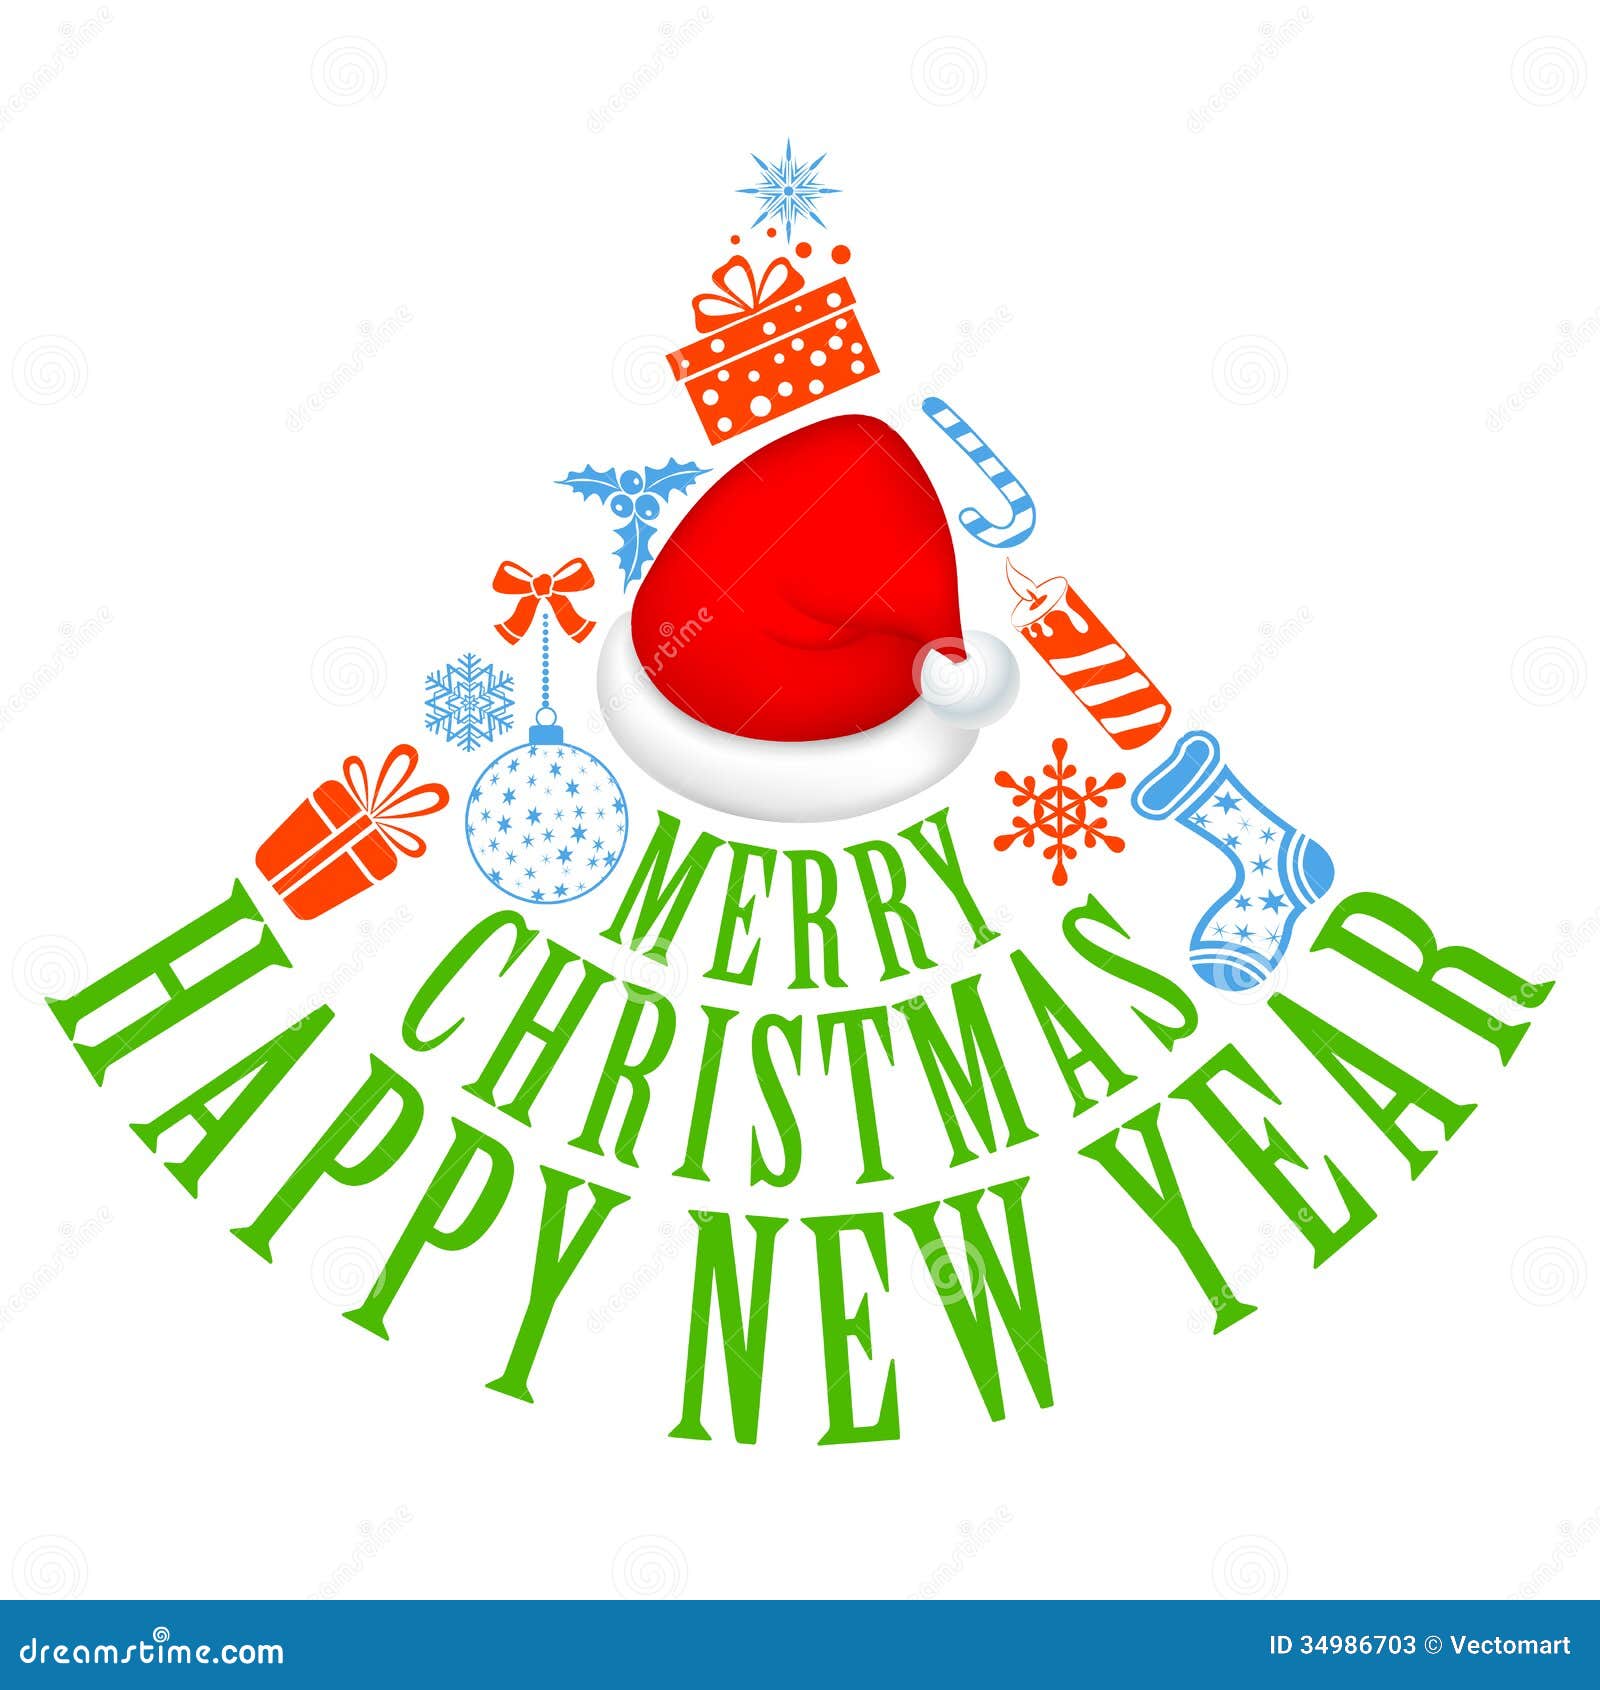 christmas and new year clipart free - photo #11